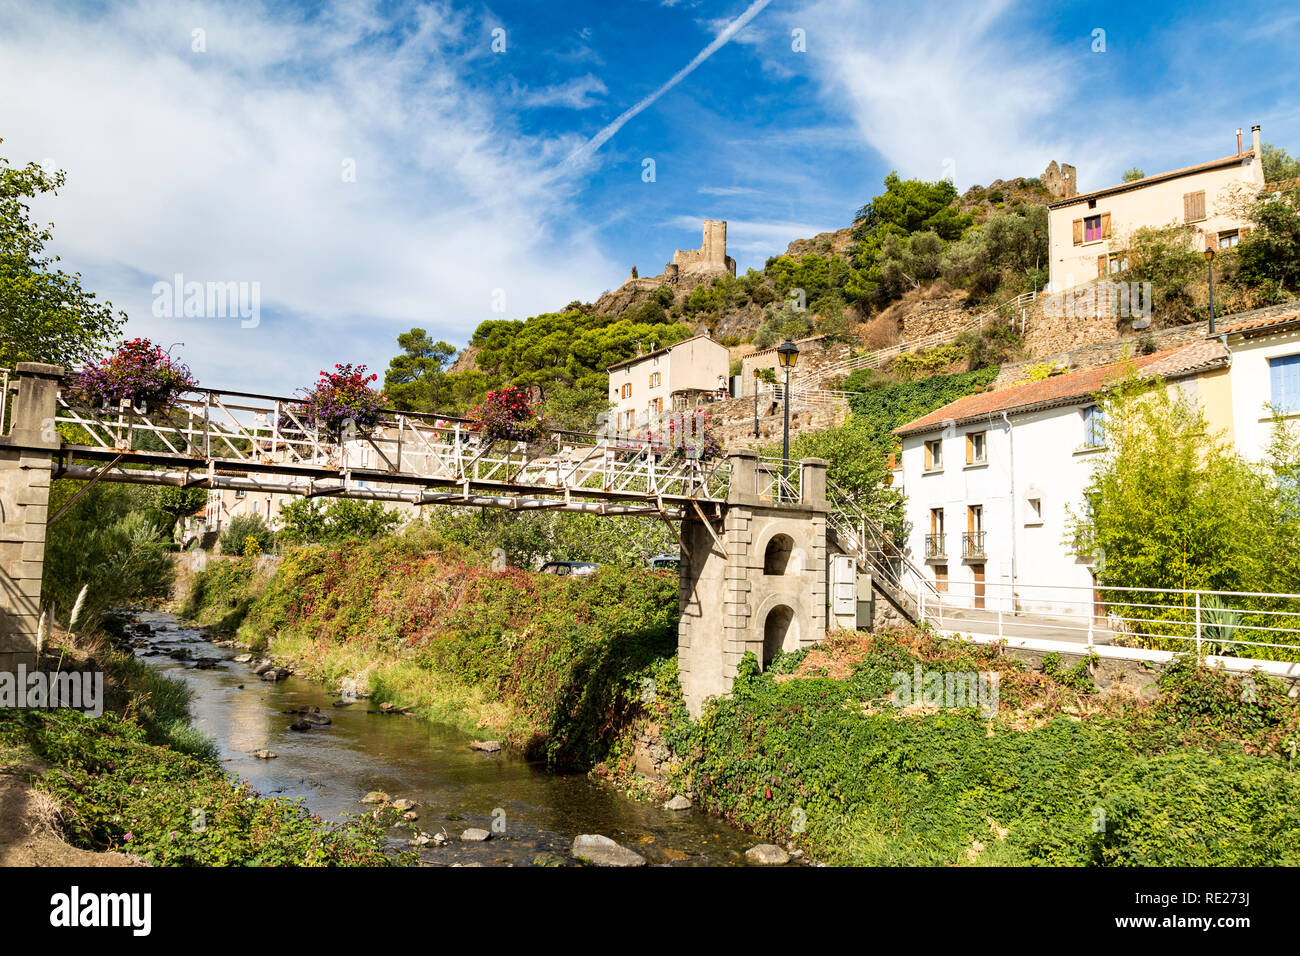 PIcturesque bridge over streamlet in Lastours, France with popular castles in the distance. Stock Photo